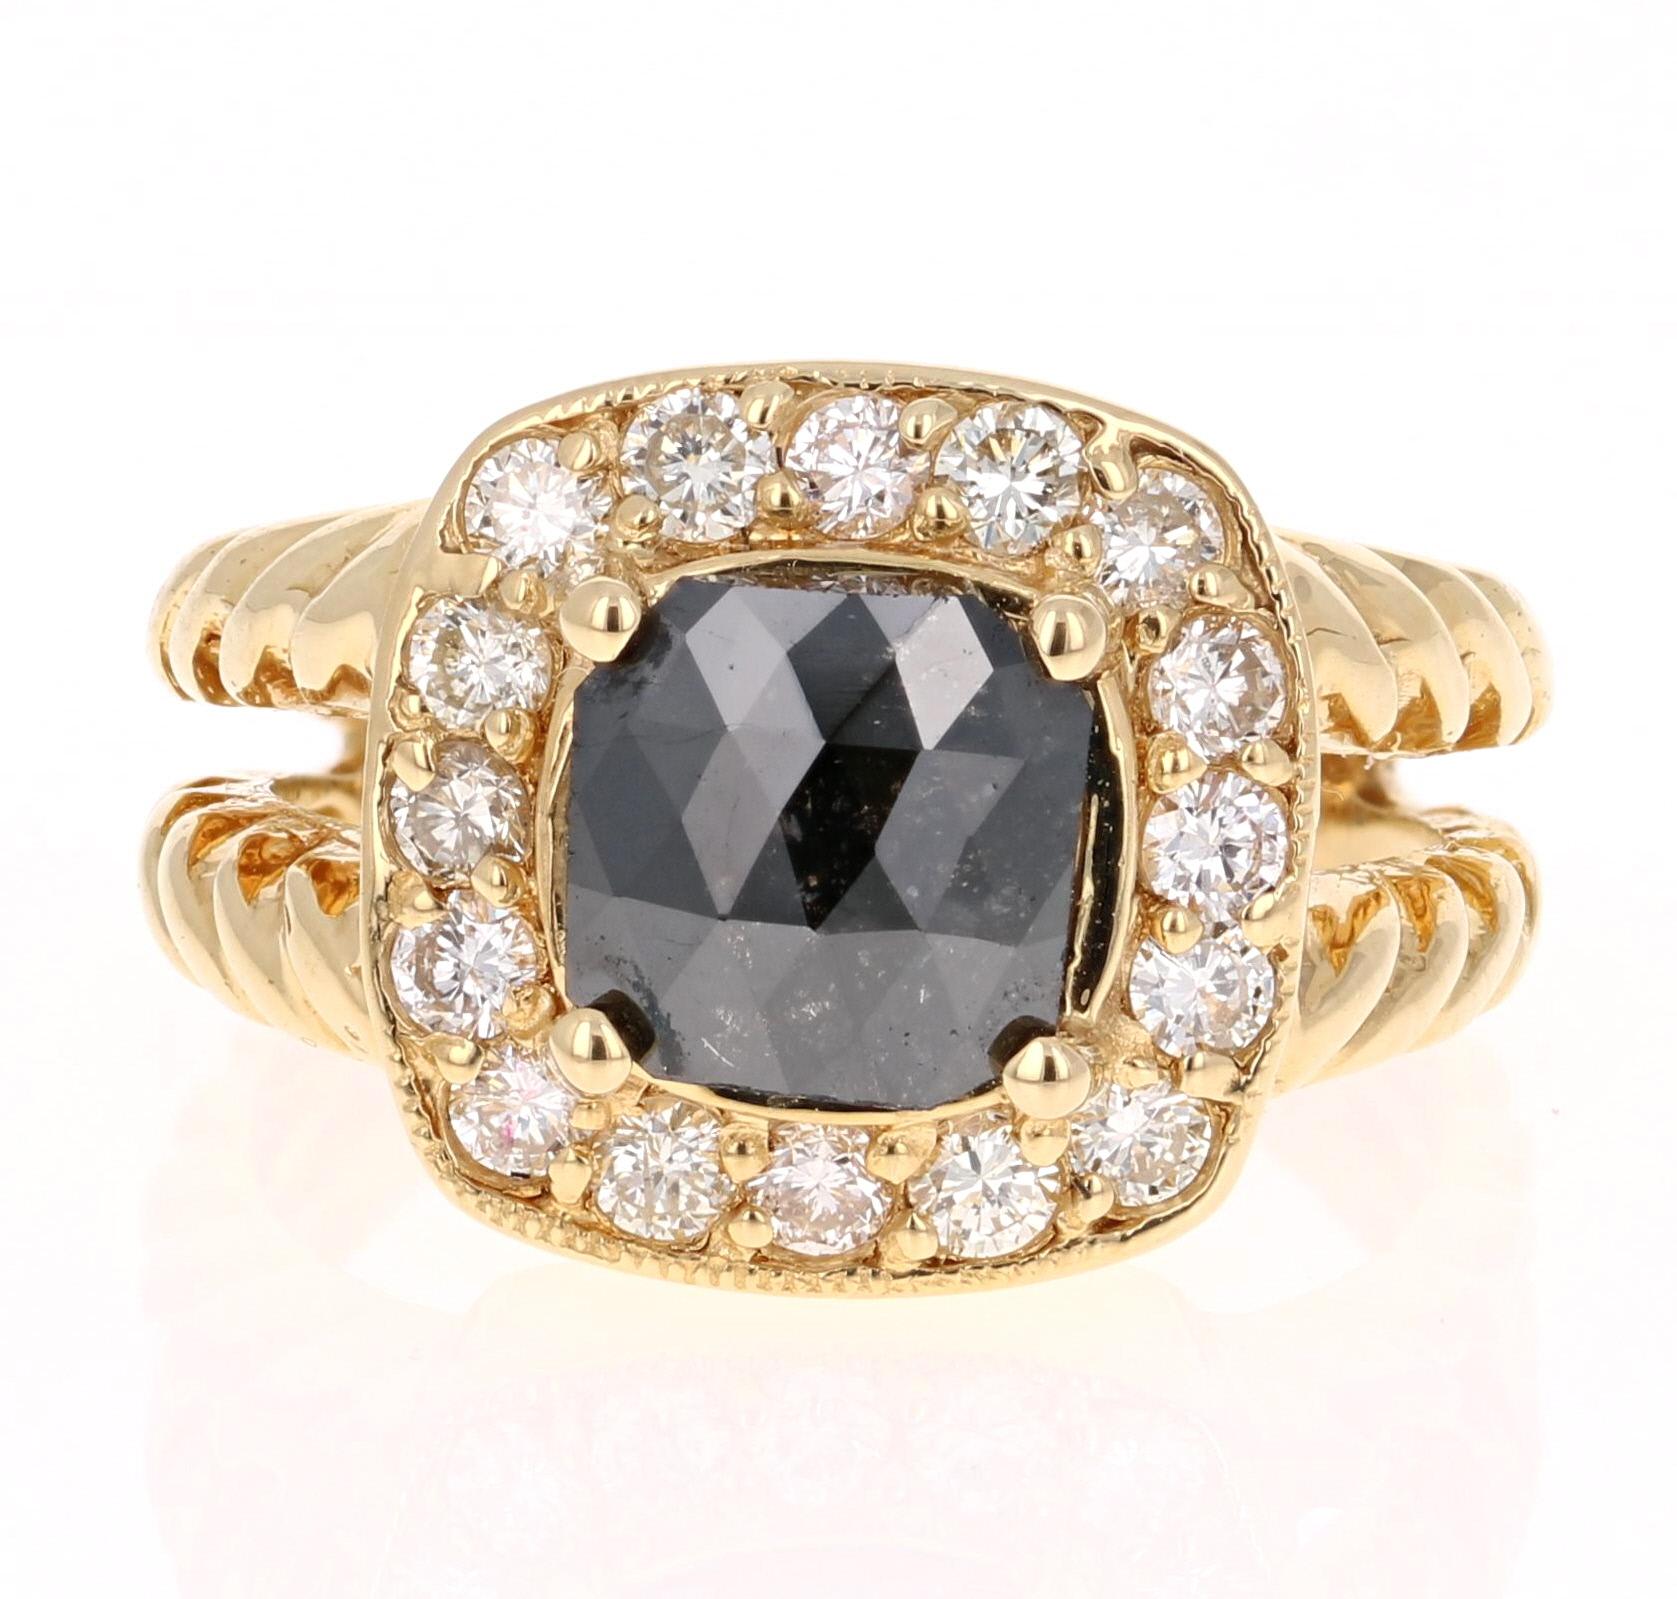 This gorgeous Yellow Gold Black Diamond Bridal Ring has a center Square Cut Black Diamond that weighs 1.47 Carats and has 16 White Round Cut Diamonds weighing 0.64 Carats (Clarity: VS2, Color: H). The total carat weight of the ring is 2.11 Carats.